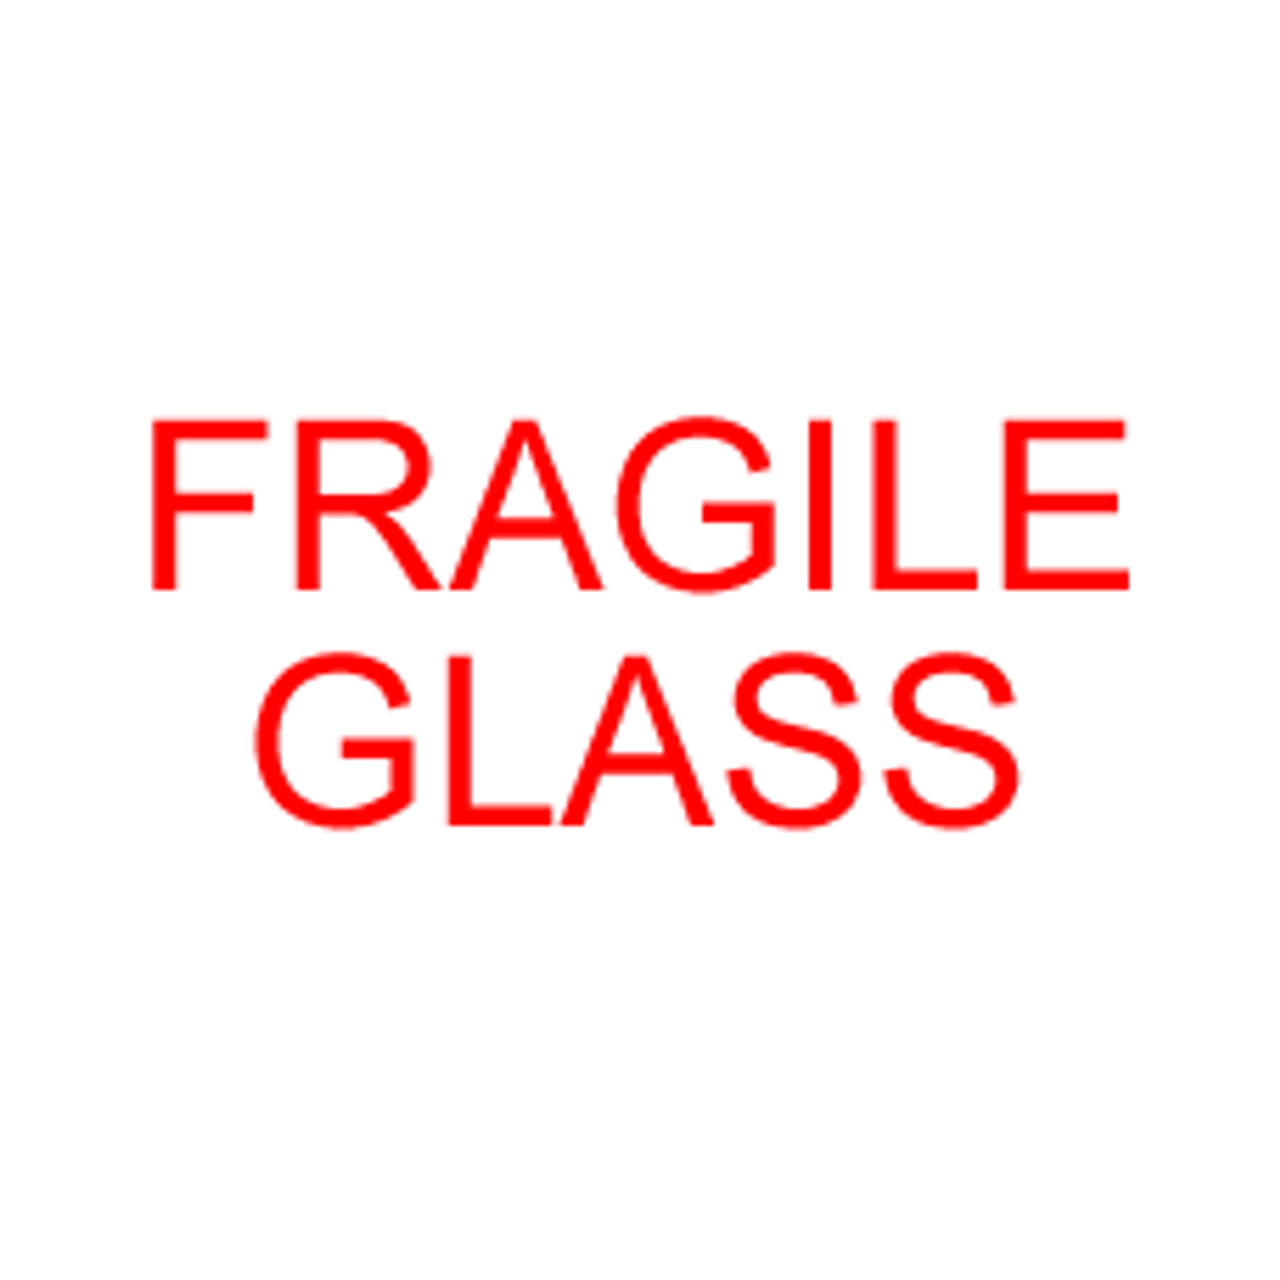 FRAGILE GLASS Rubber Stamp for mail use self-inking